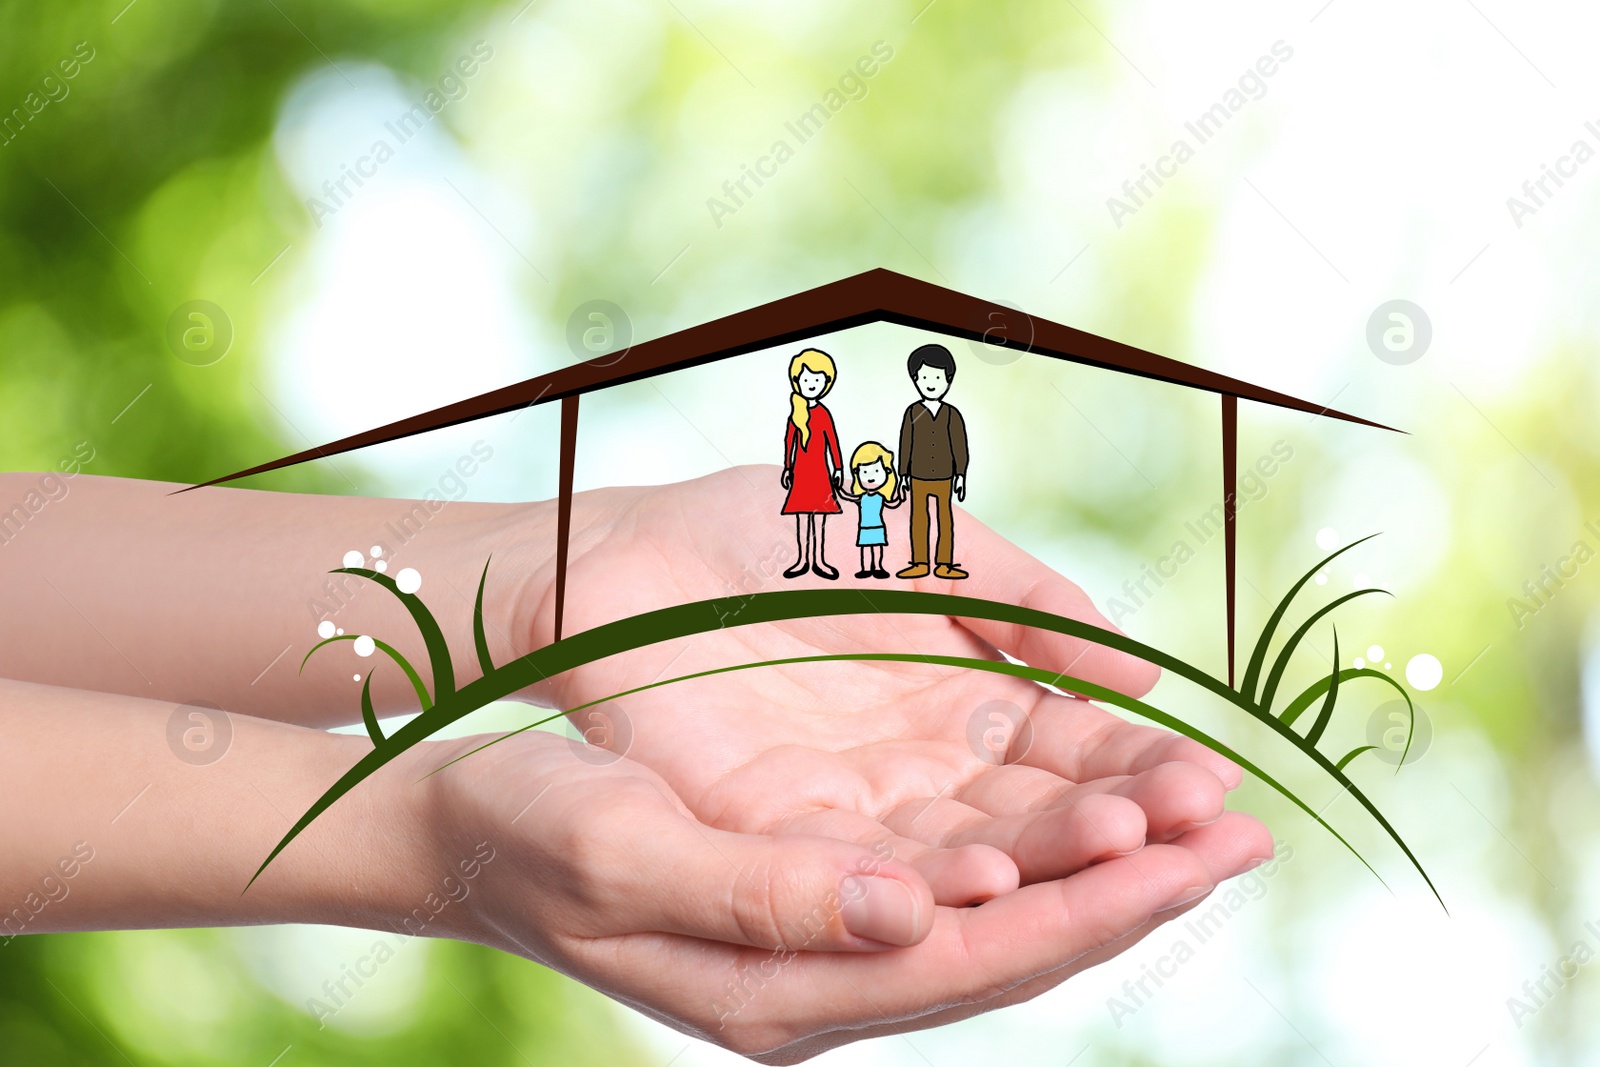 Image of Woman demonstrating illustration of house with family on blurred green background, closeup